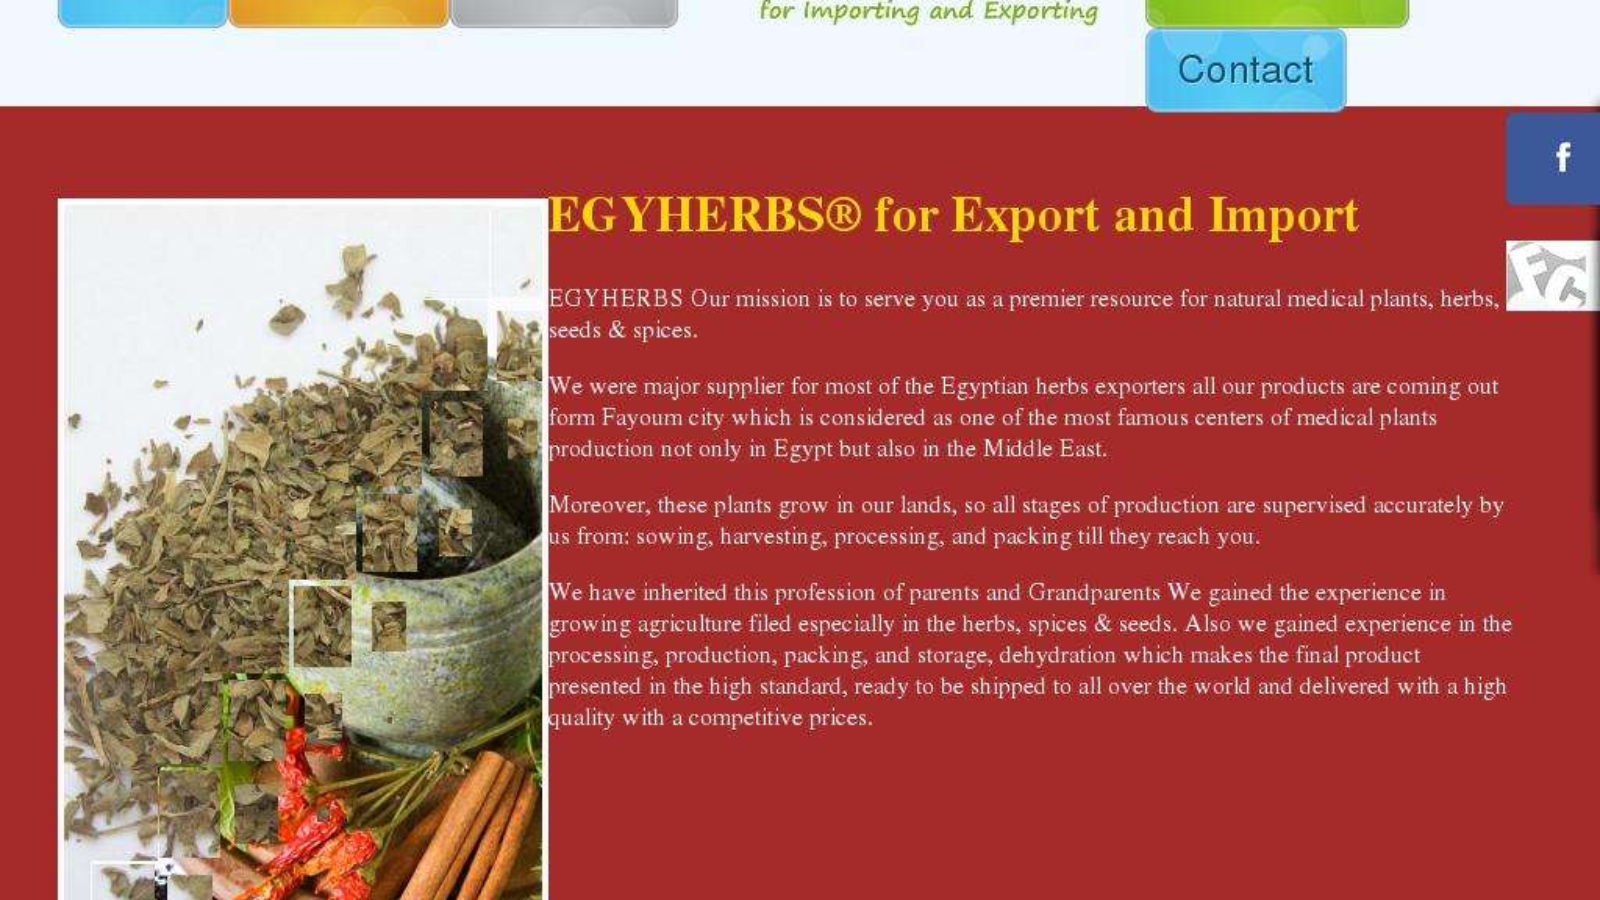 egyherbs-for-export-and-import-b